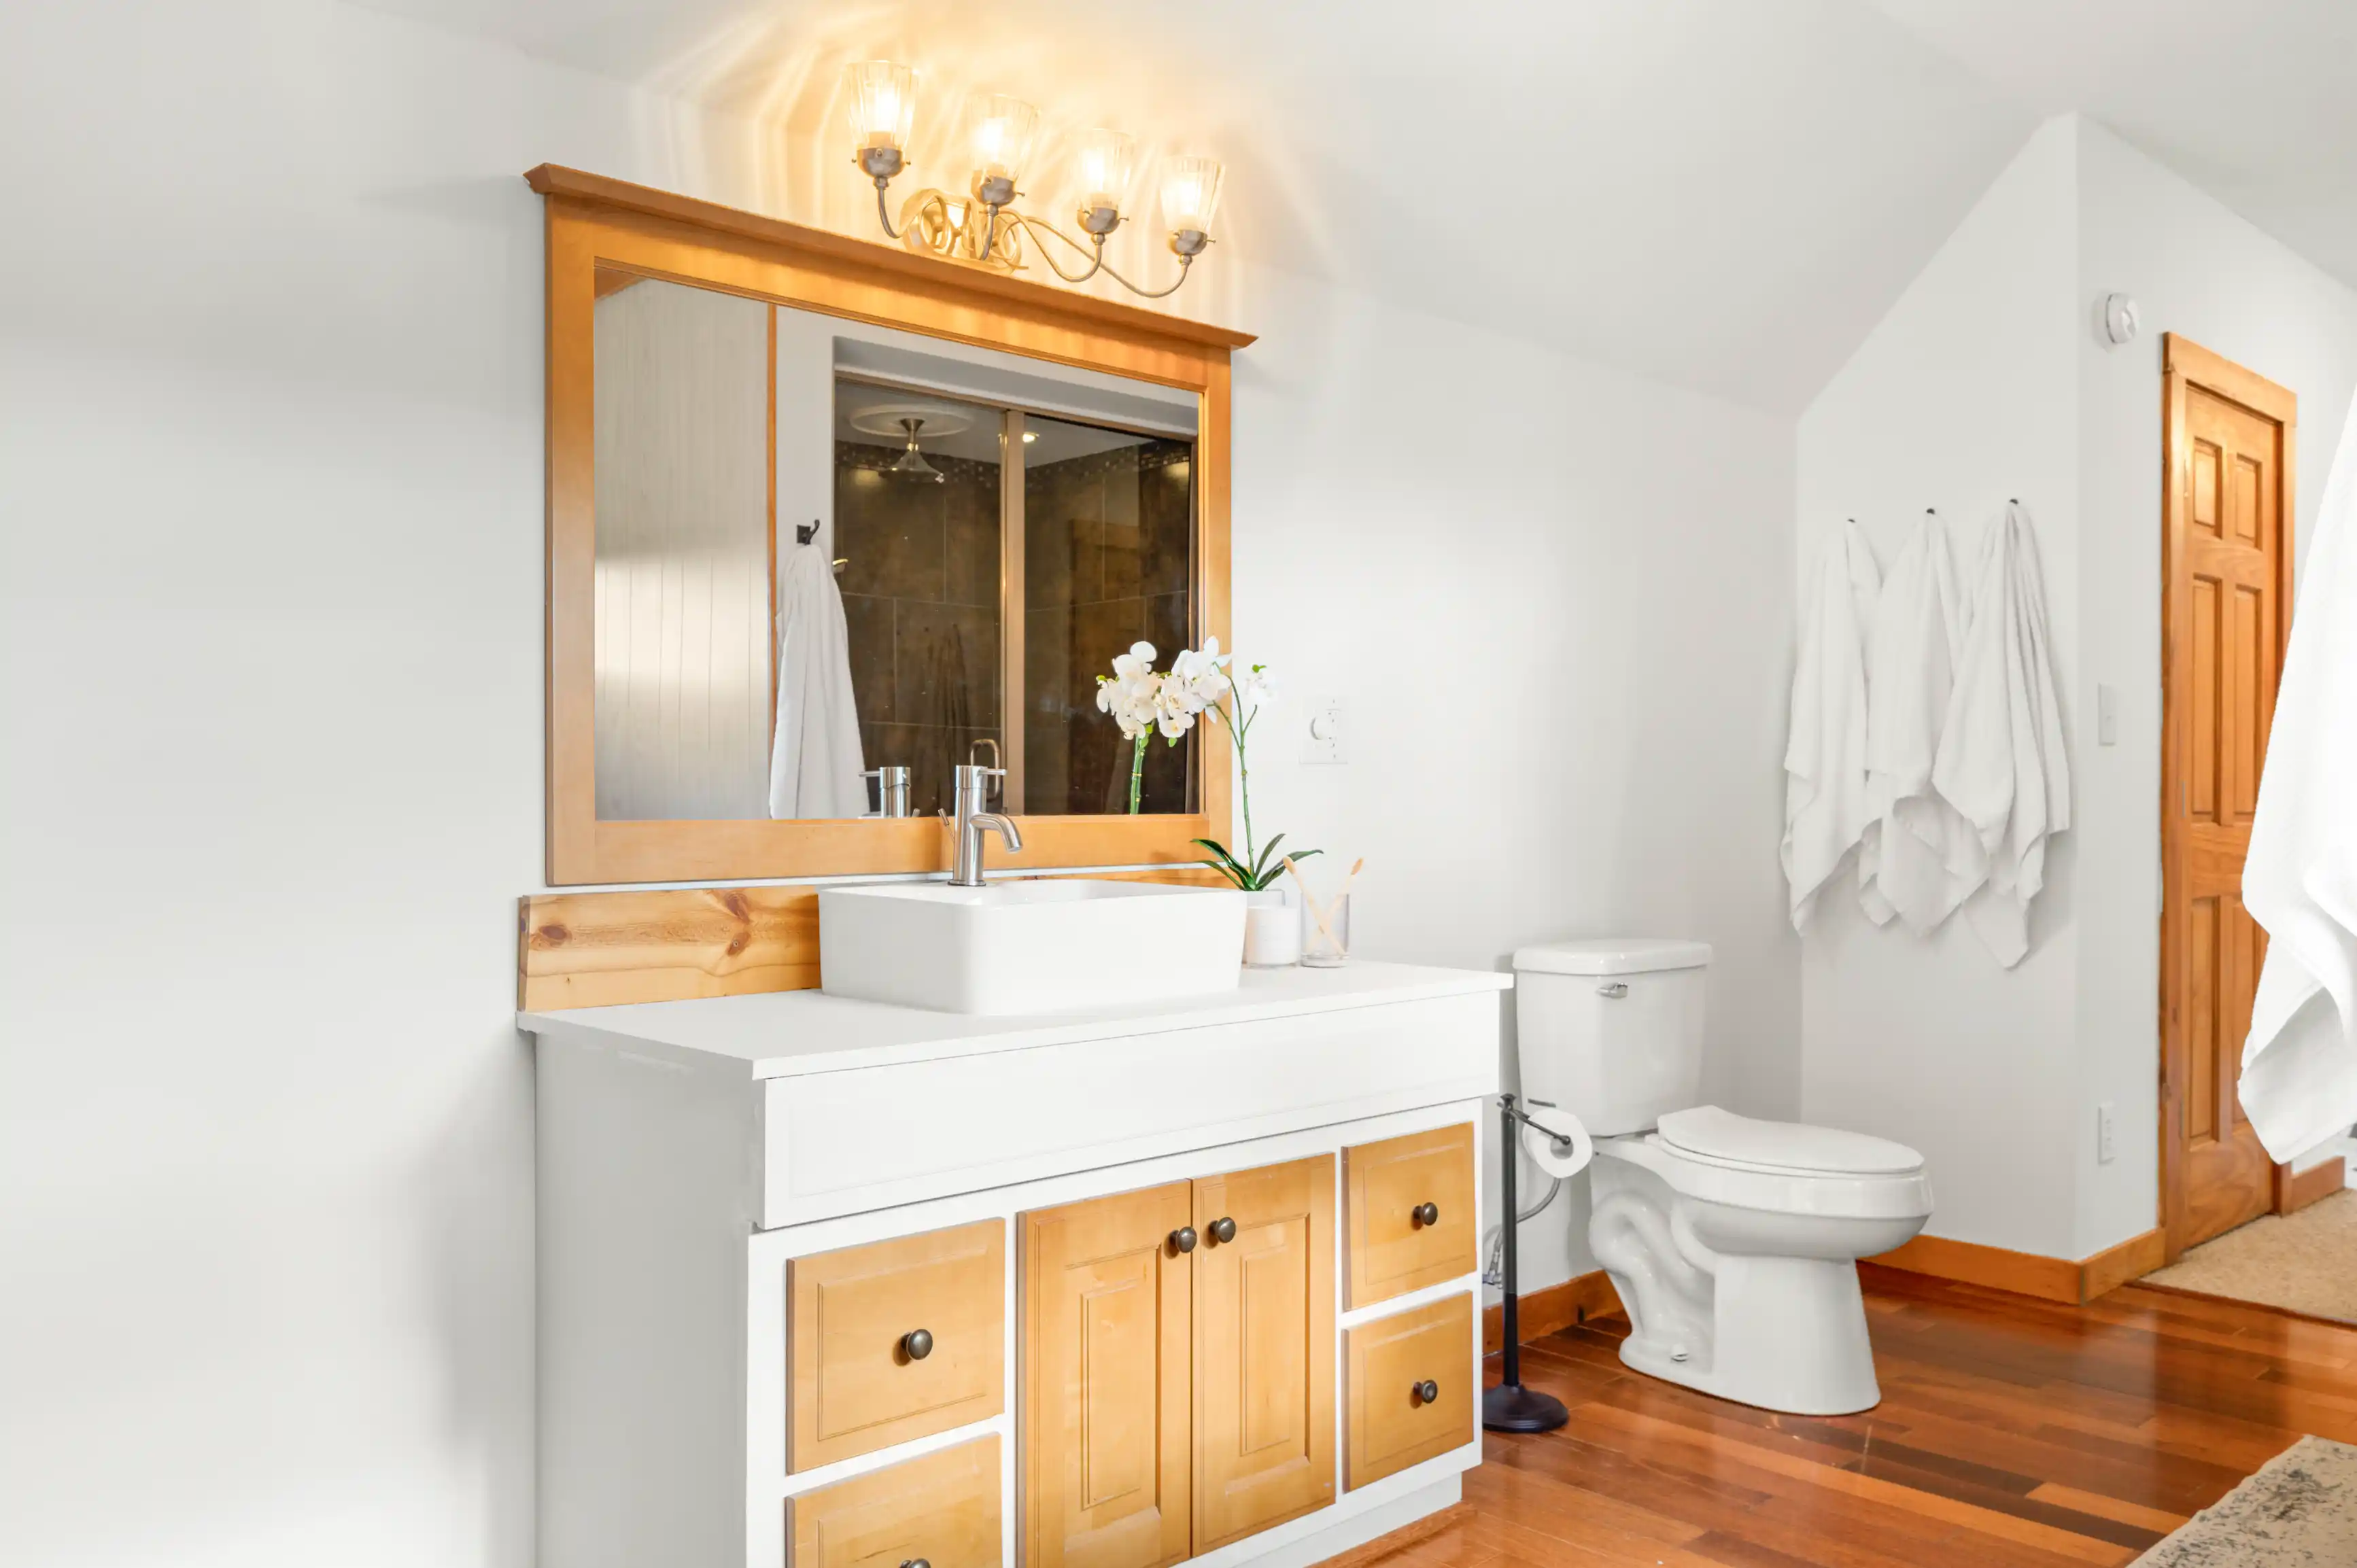 Bright and modern bathroom interior with wooden vanity cabinet, white sink, large mirror, toilet, and towels hanging on the wall.